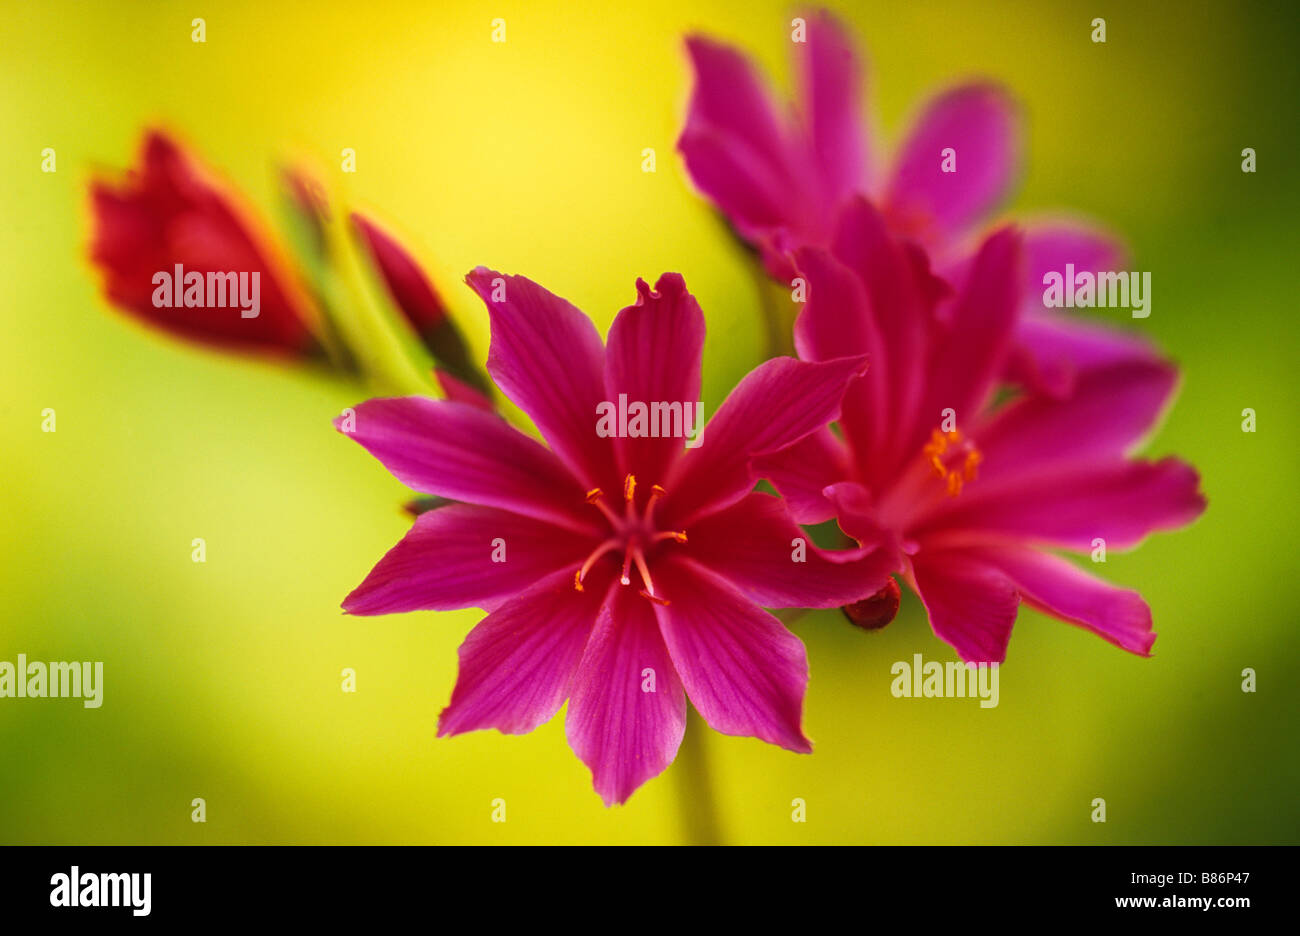 A close up of flowering Lewisia cotyledon against a yellow background Stock Photo